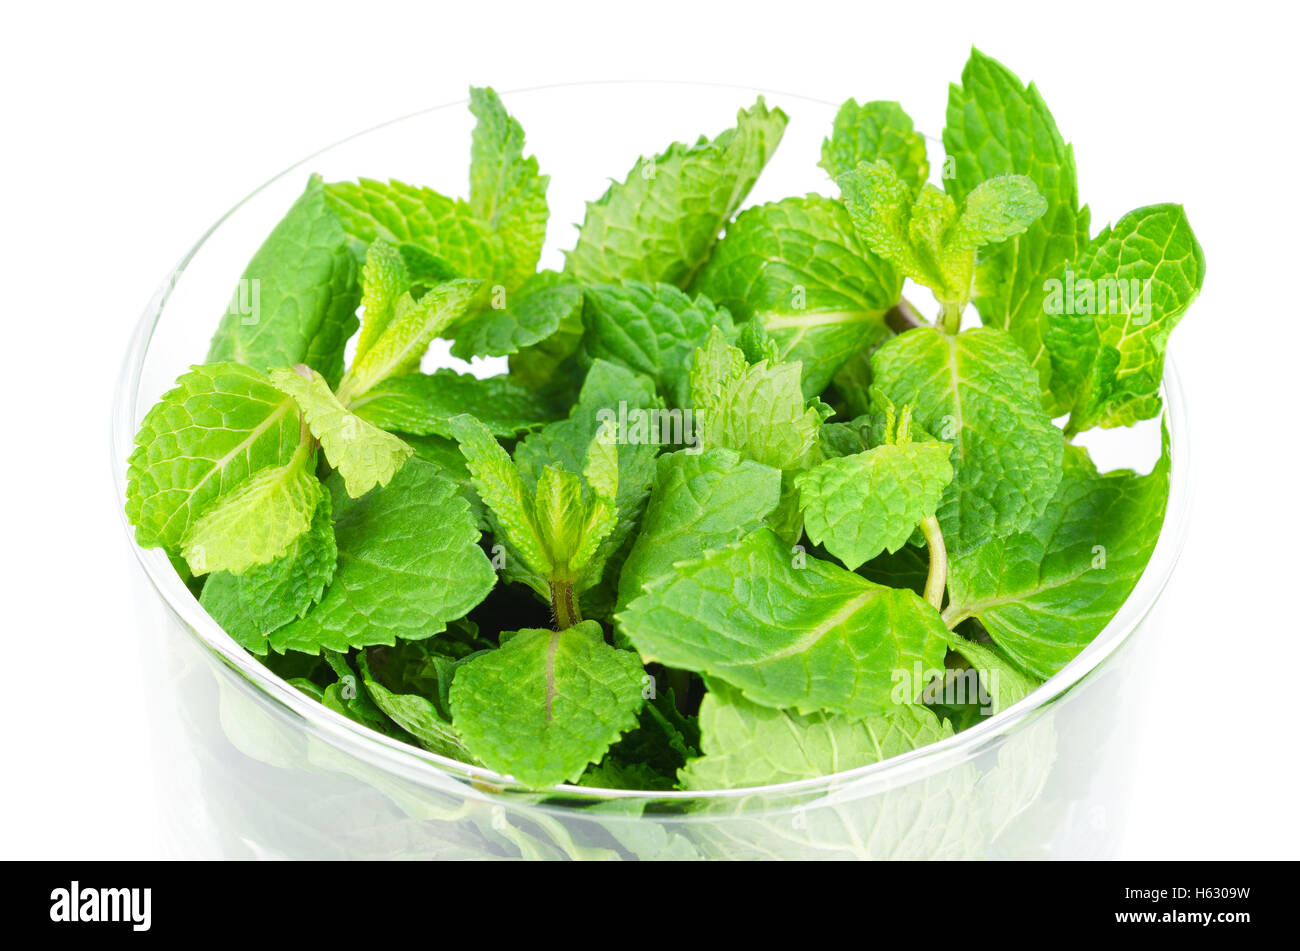 Fresh peppermint leaves in glass bowl over white. Green Mentha piperita is an edible herb. Stock Photo